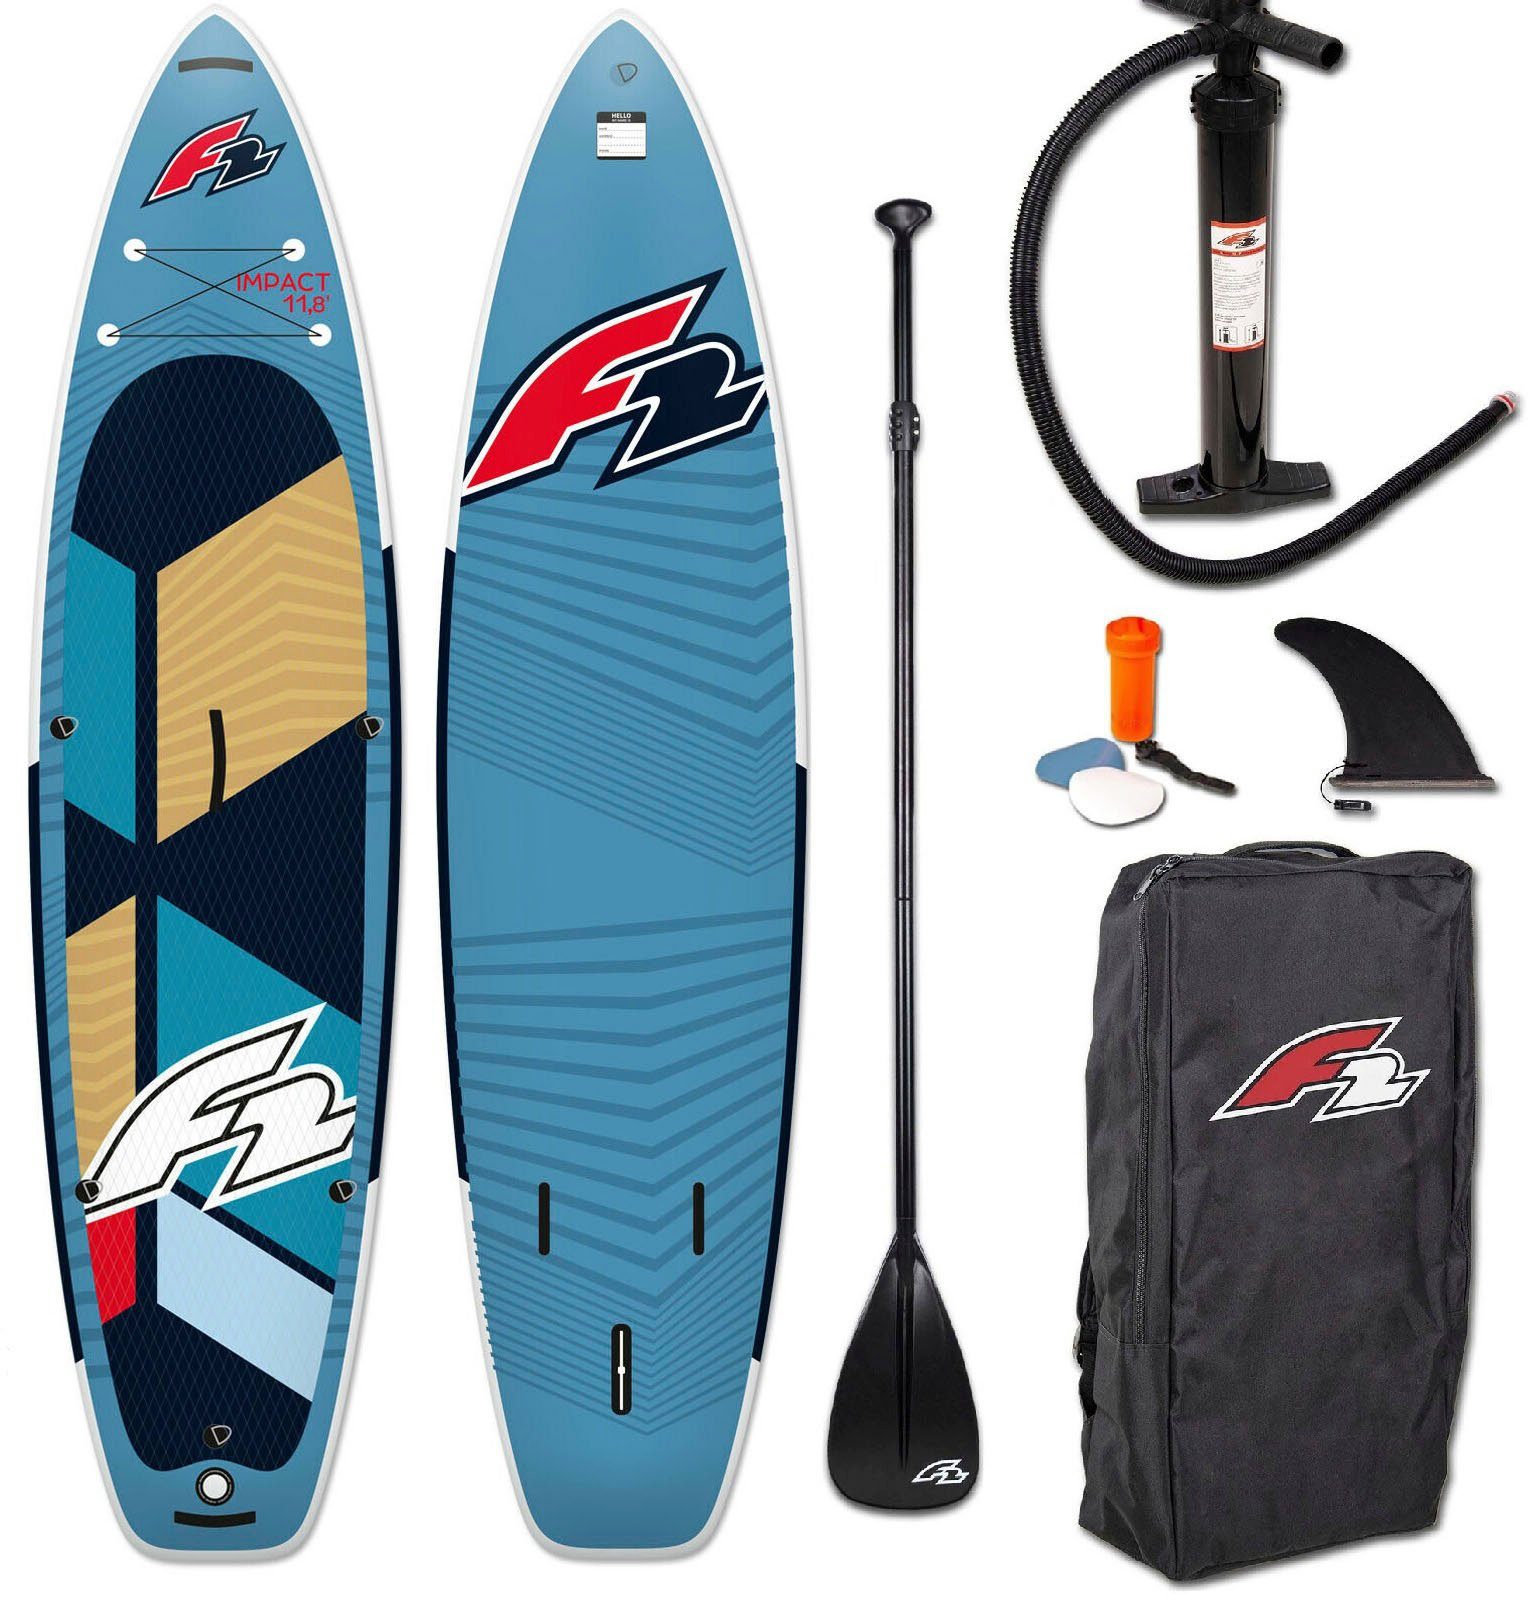 Impact Inflatable tlg) F2 10,8, turquoise SUP-Board (Packung, 5